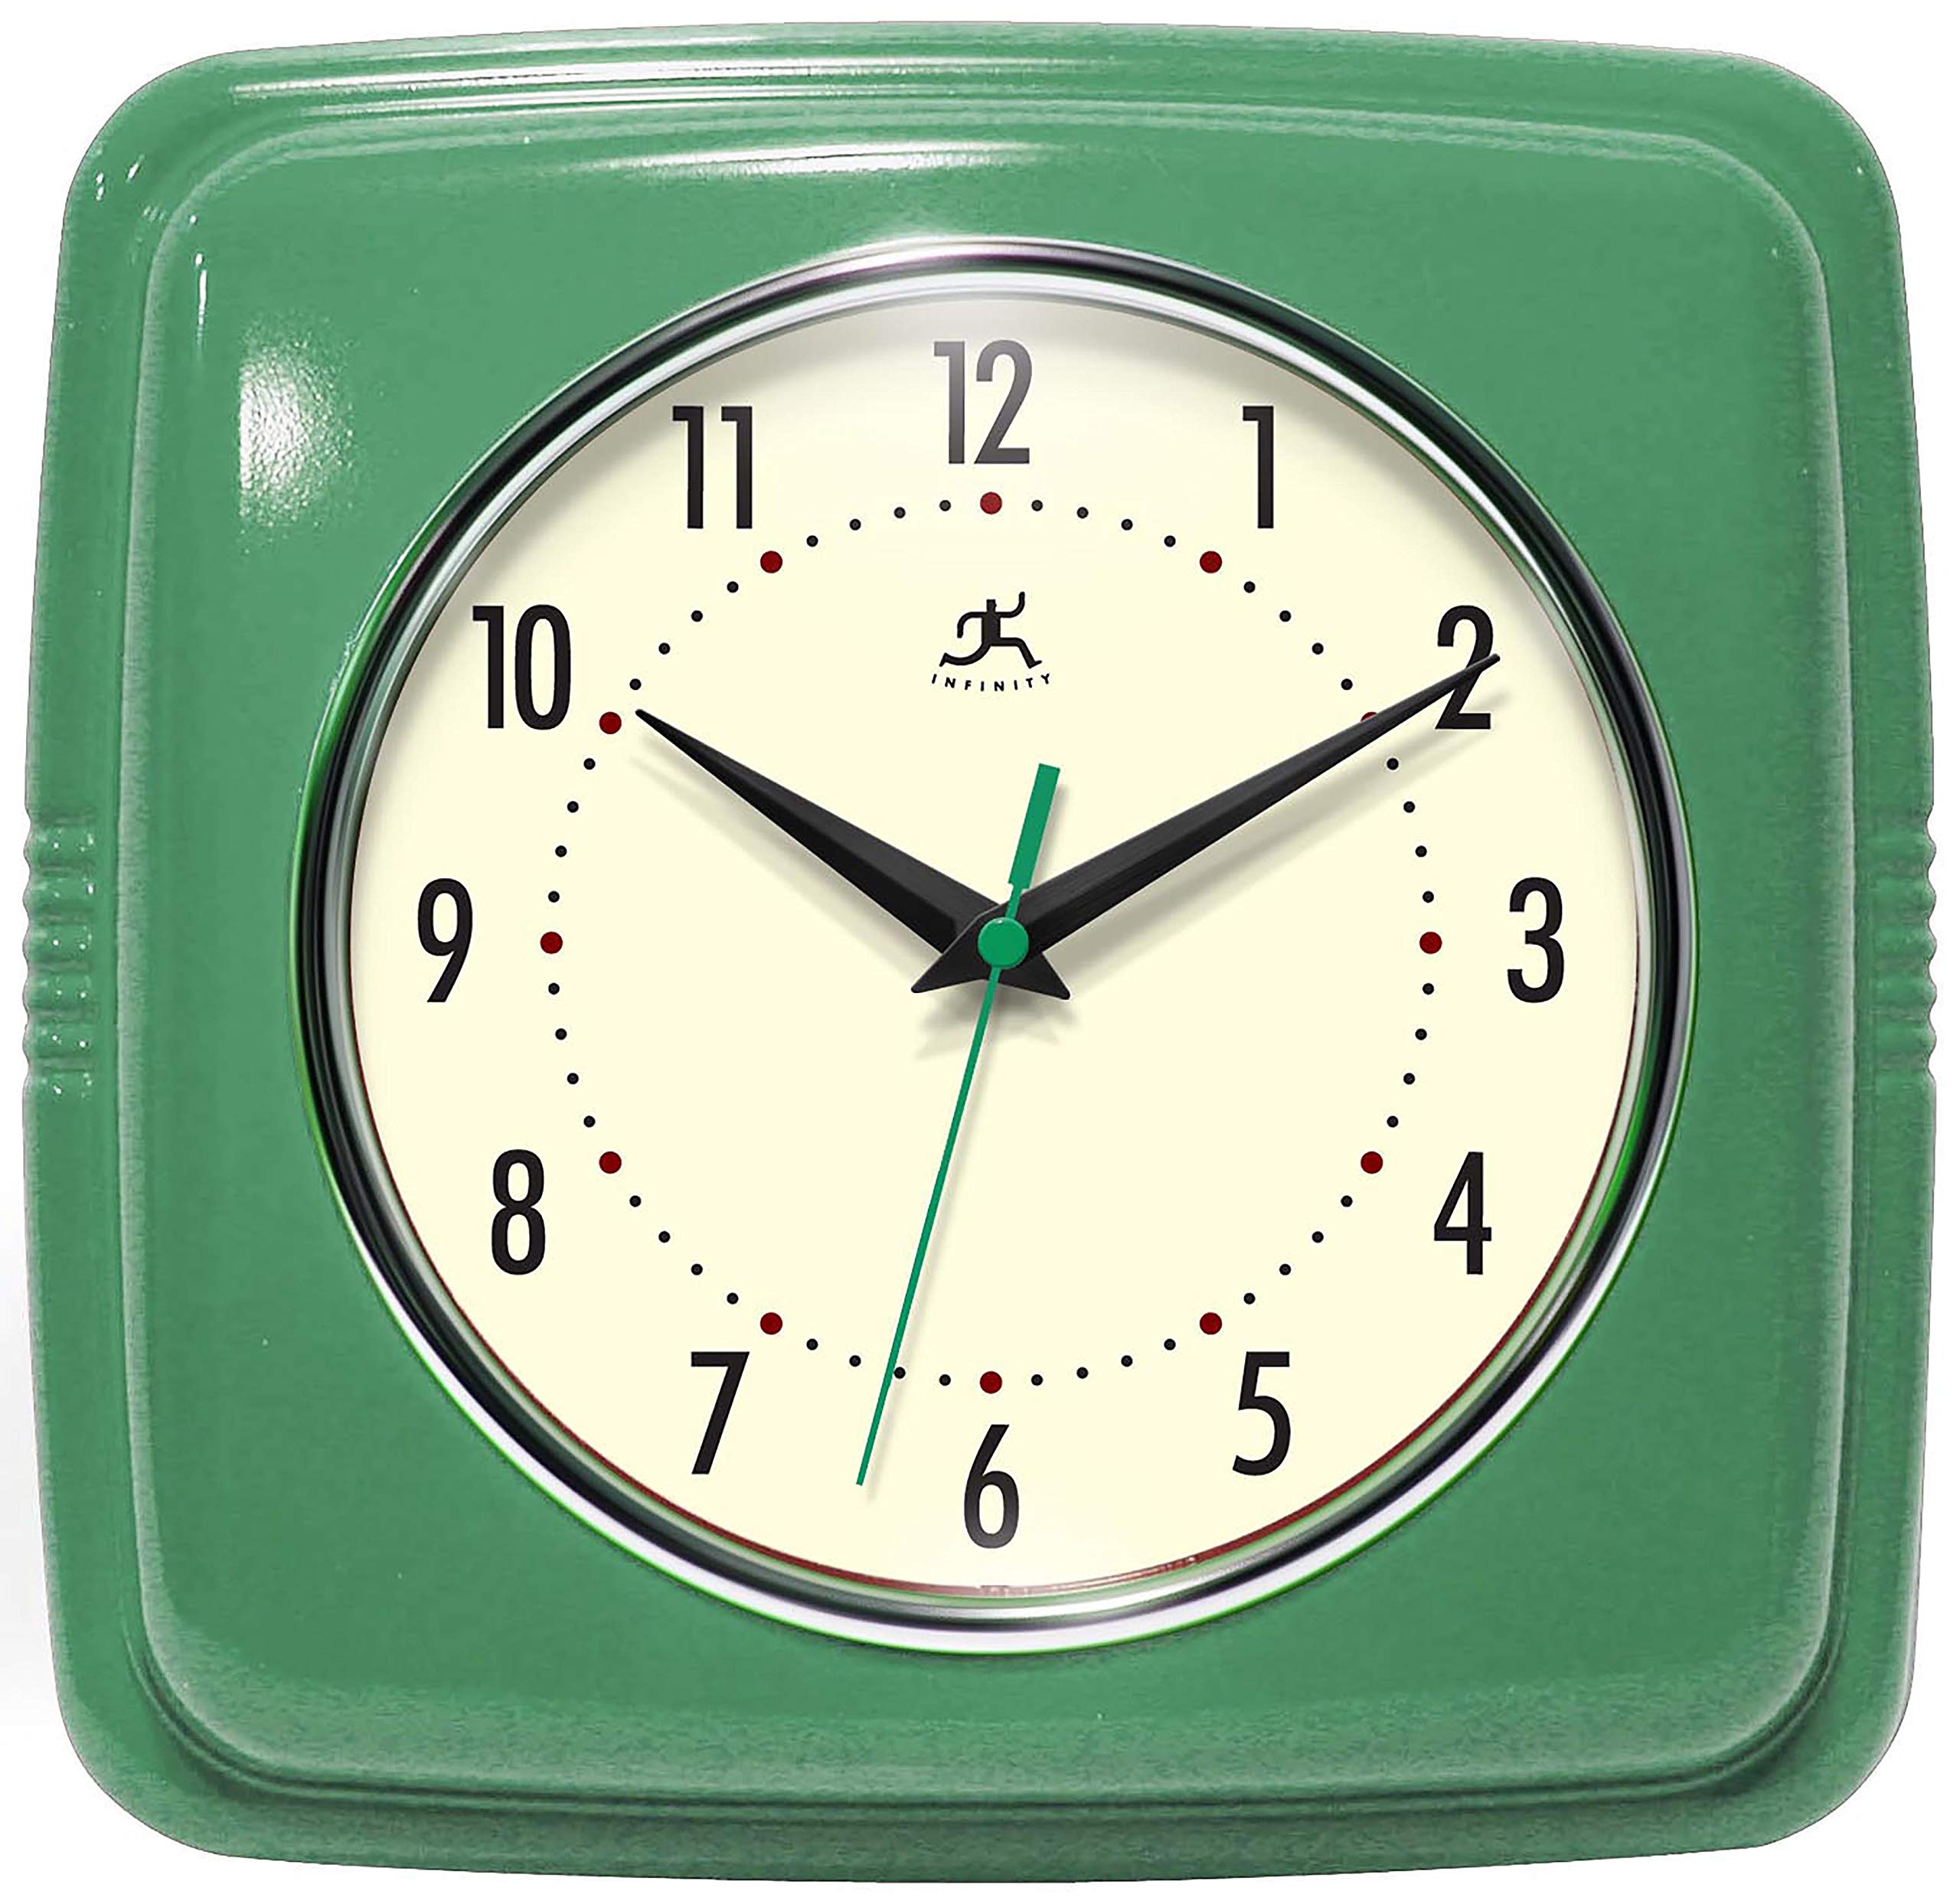 Infinity Instruments Square Silent Retro Wall Clock